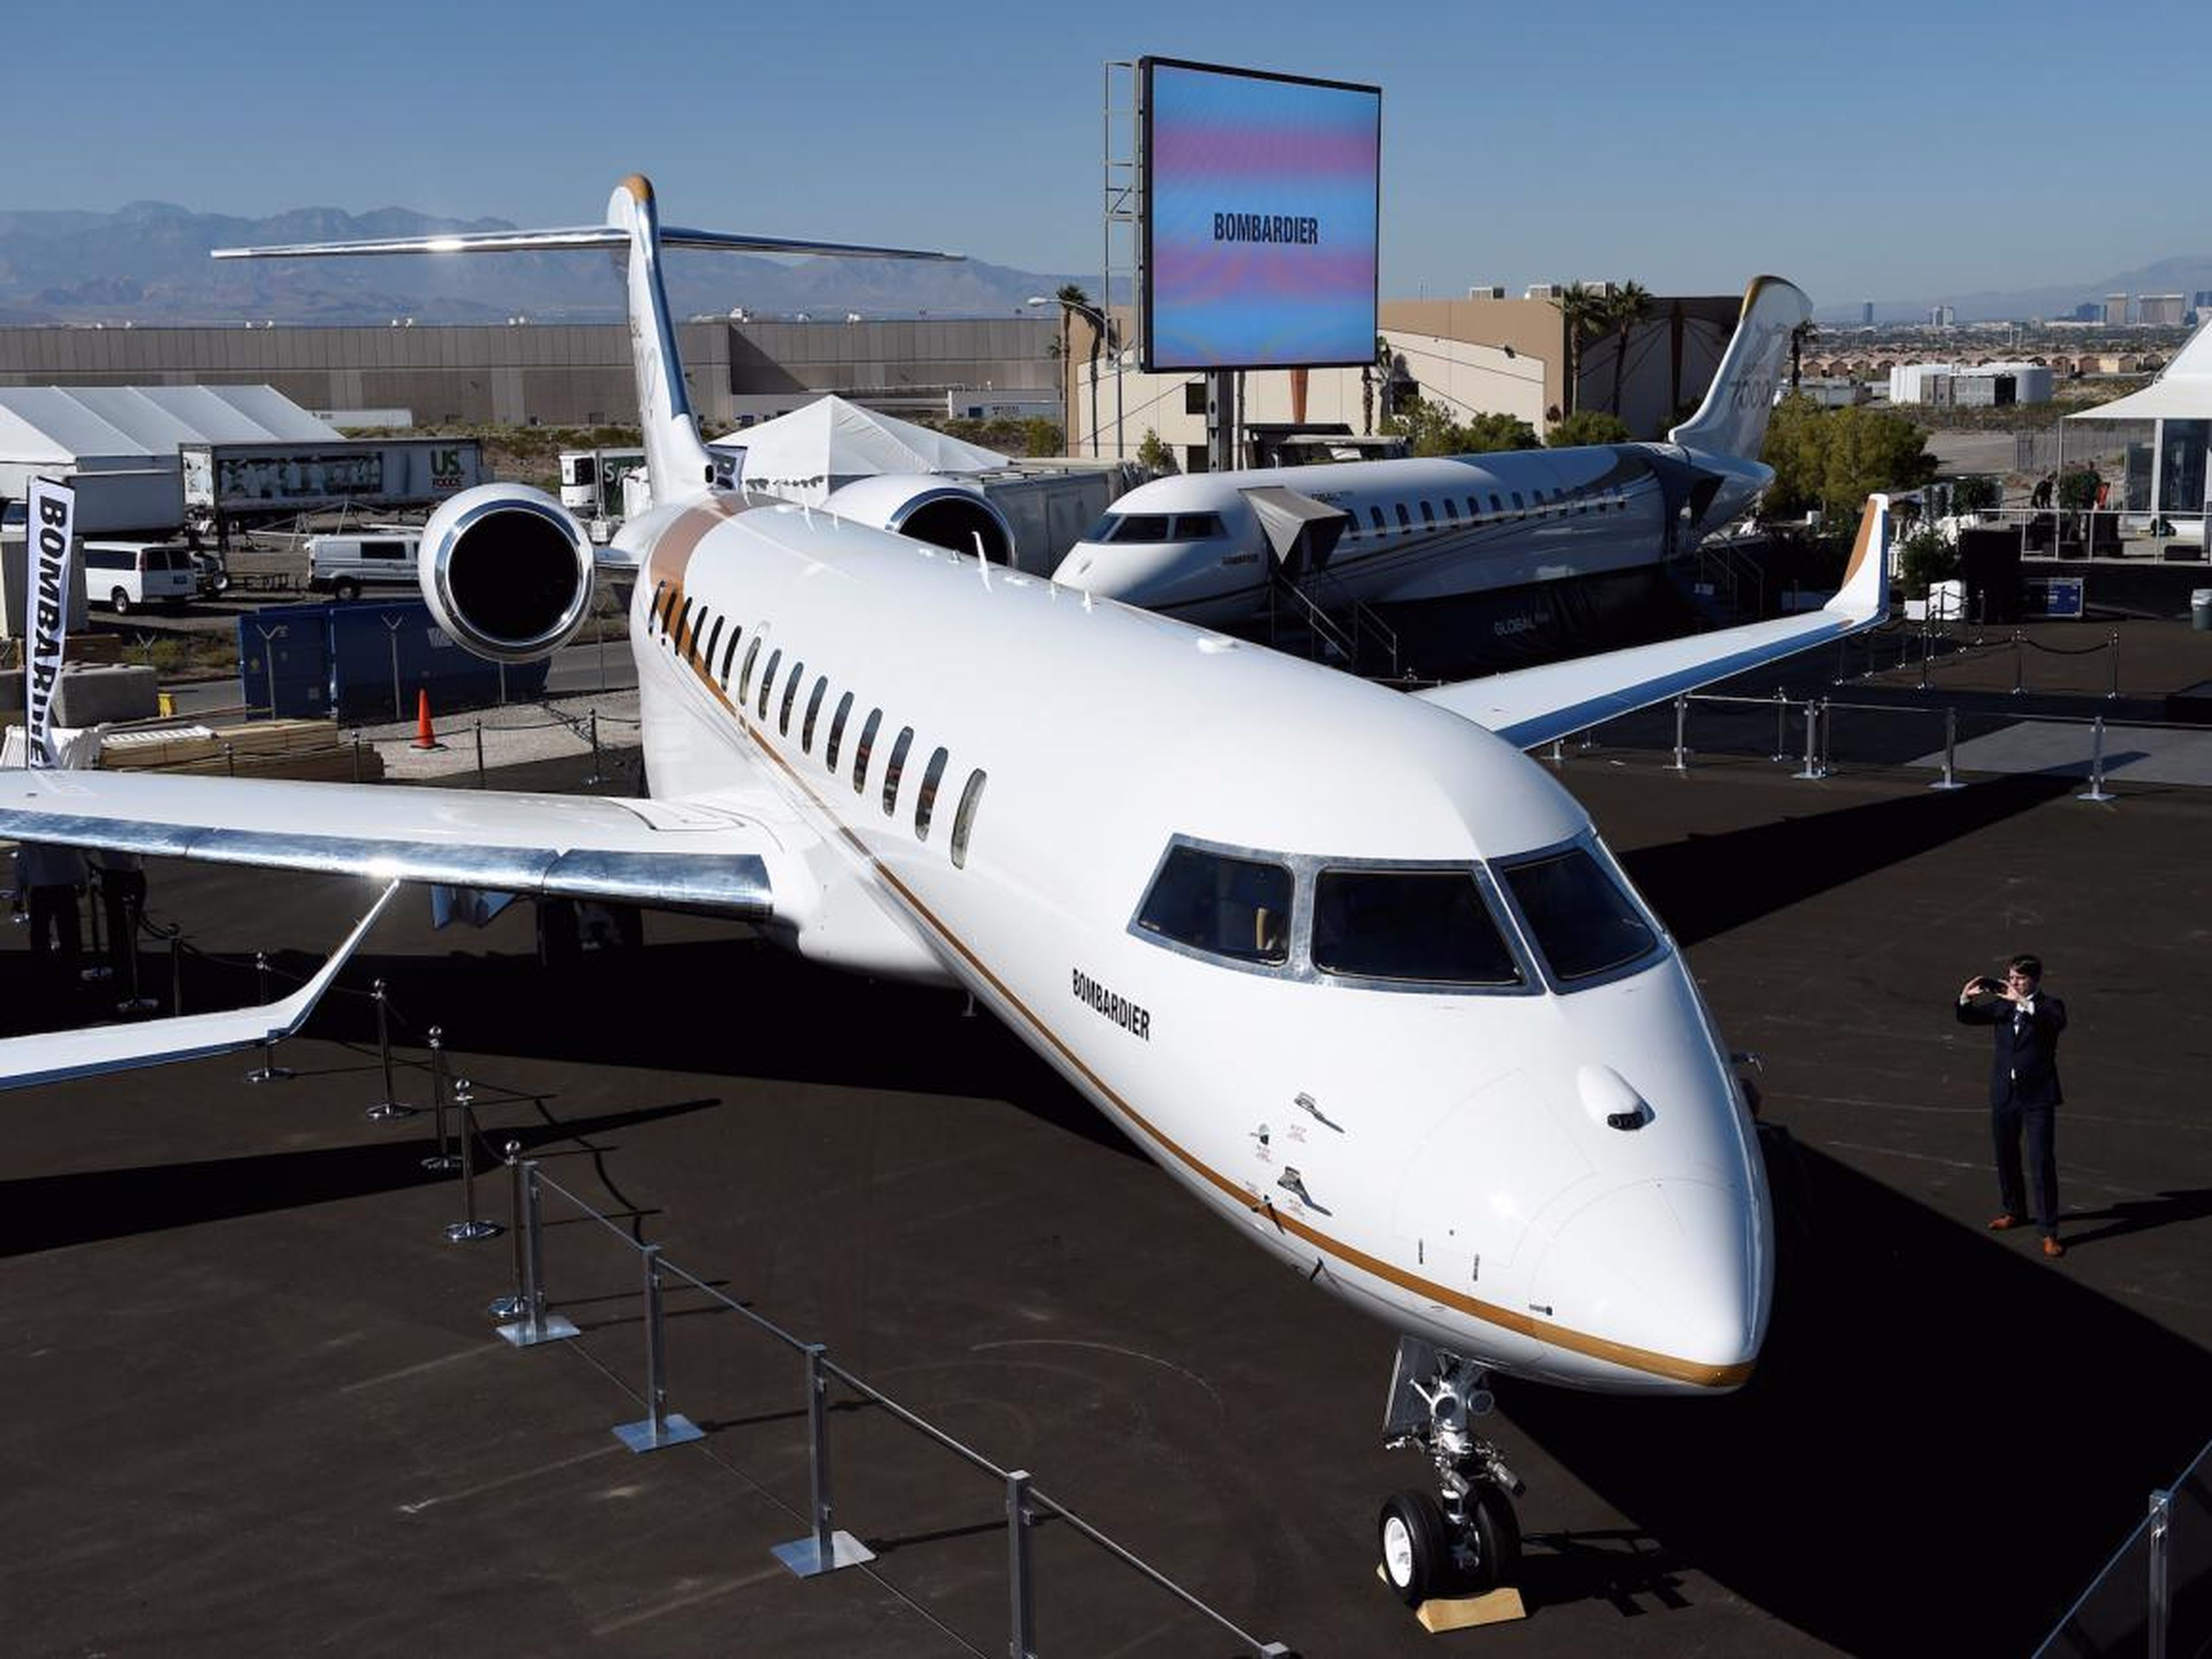 The Global 7500, originally known as the Global 7000, is Bombardier's most expensive offering, at $72.8 million.